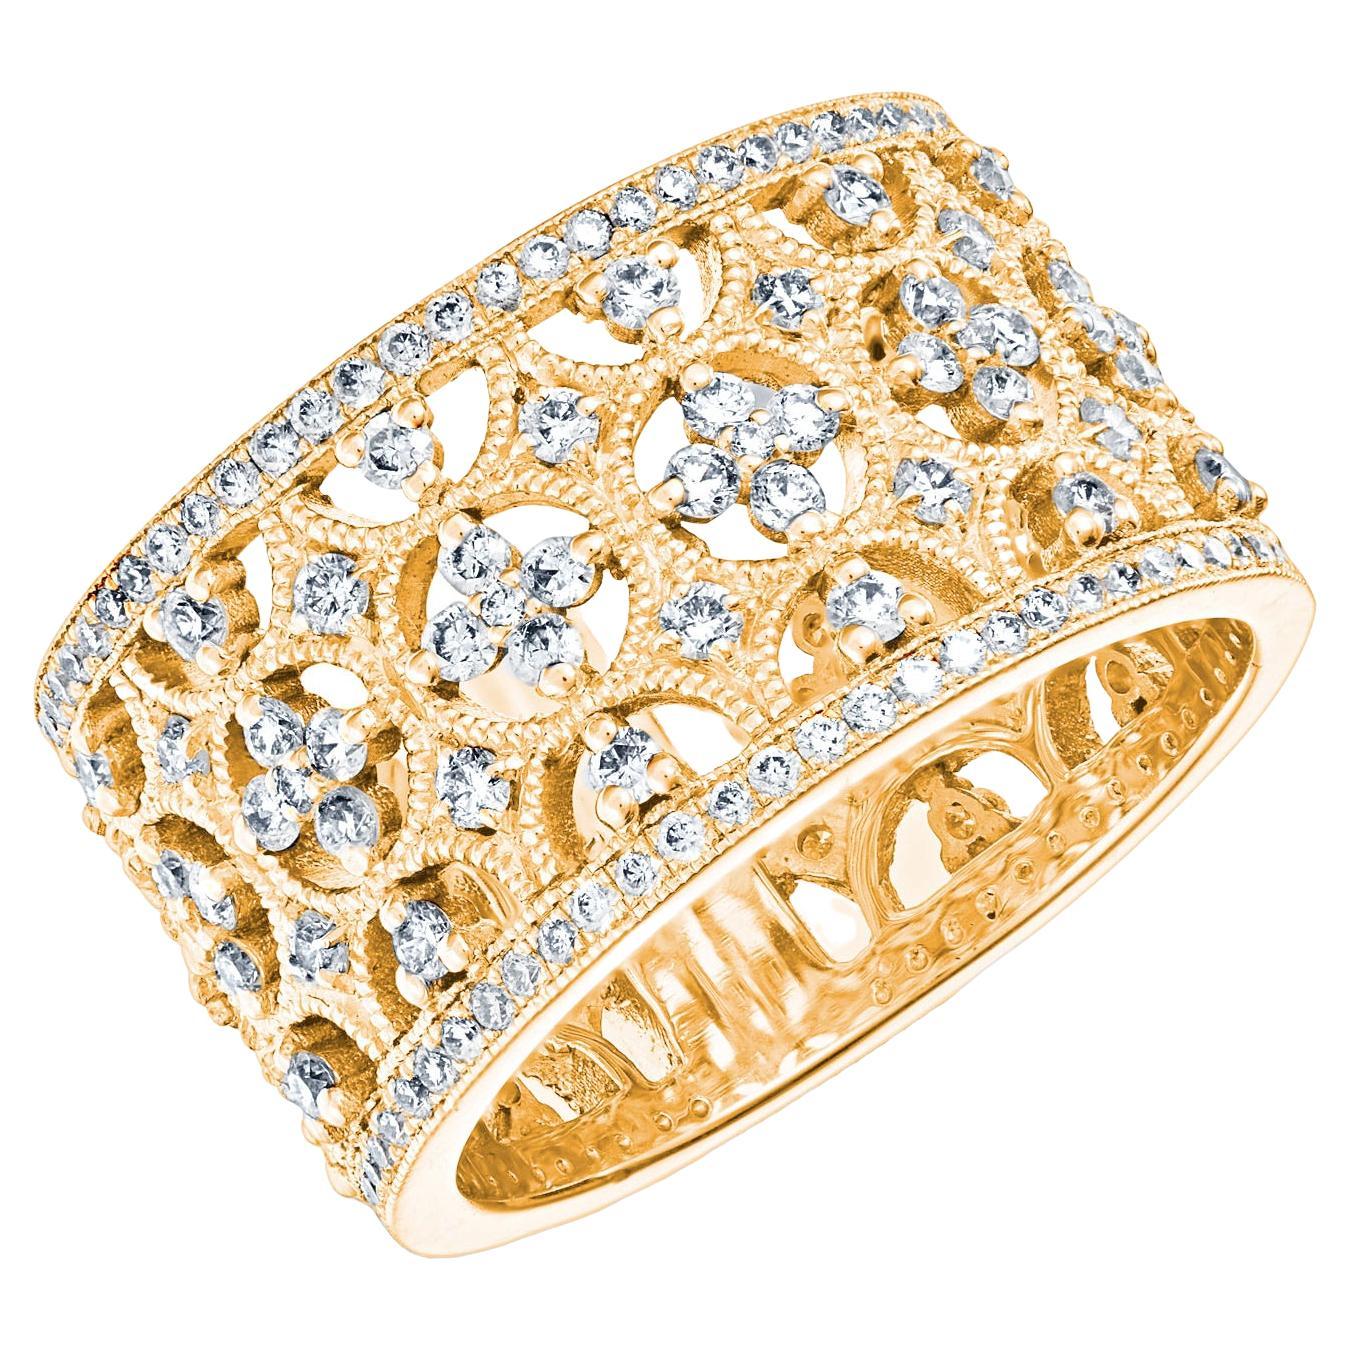 For Sale:  18k Yellow Gold Lace Band Ring 1.16 Cts Of Diamonds Milgrain Setting